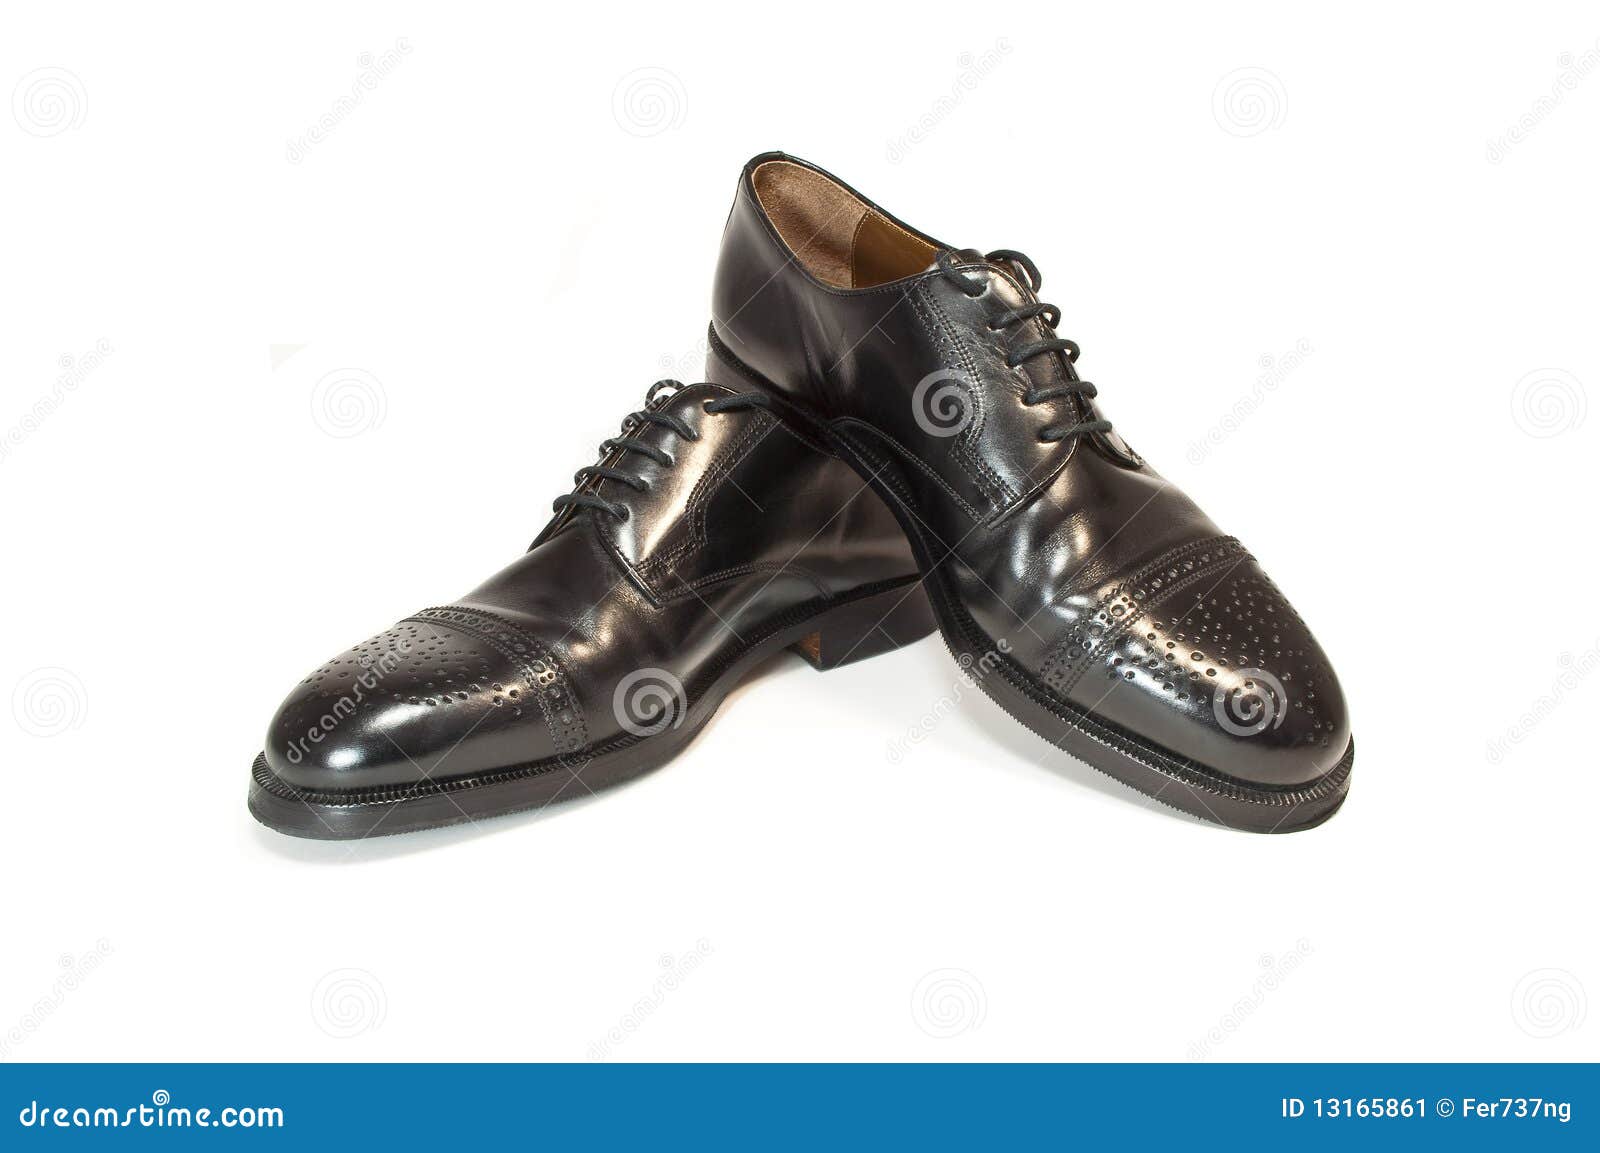 Black men s leather shoes stock image. Image of pair - 13165861